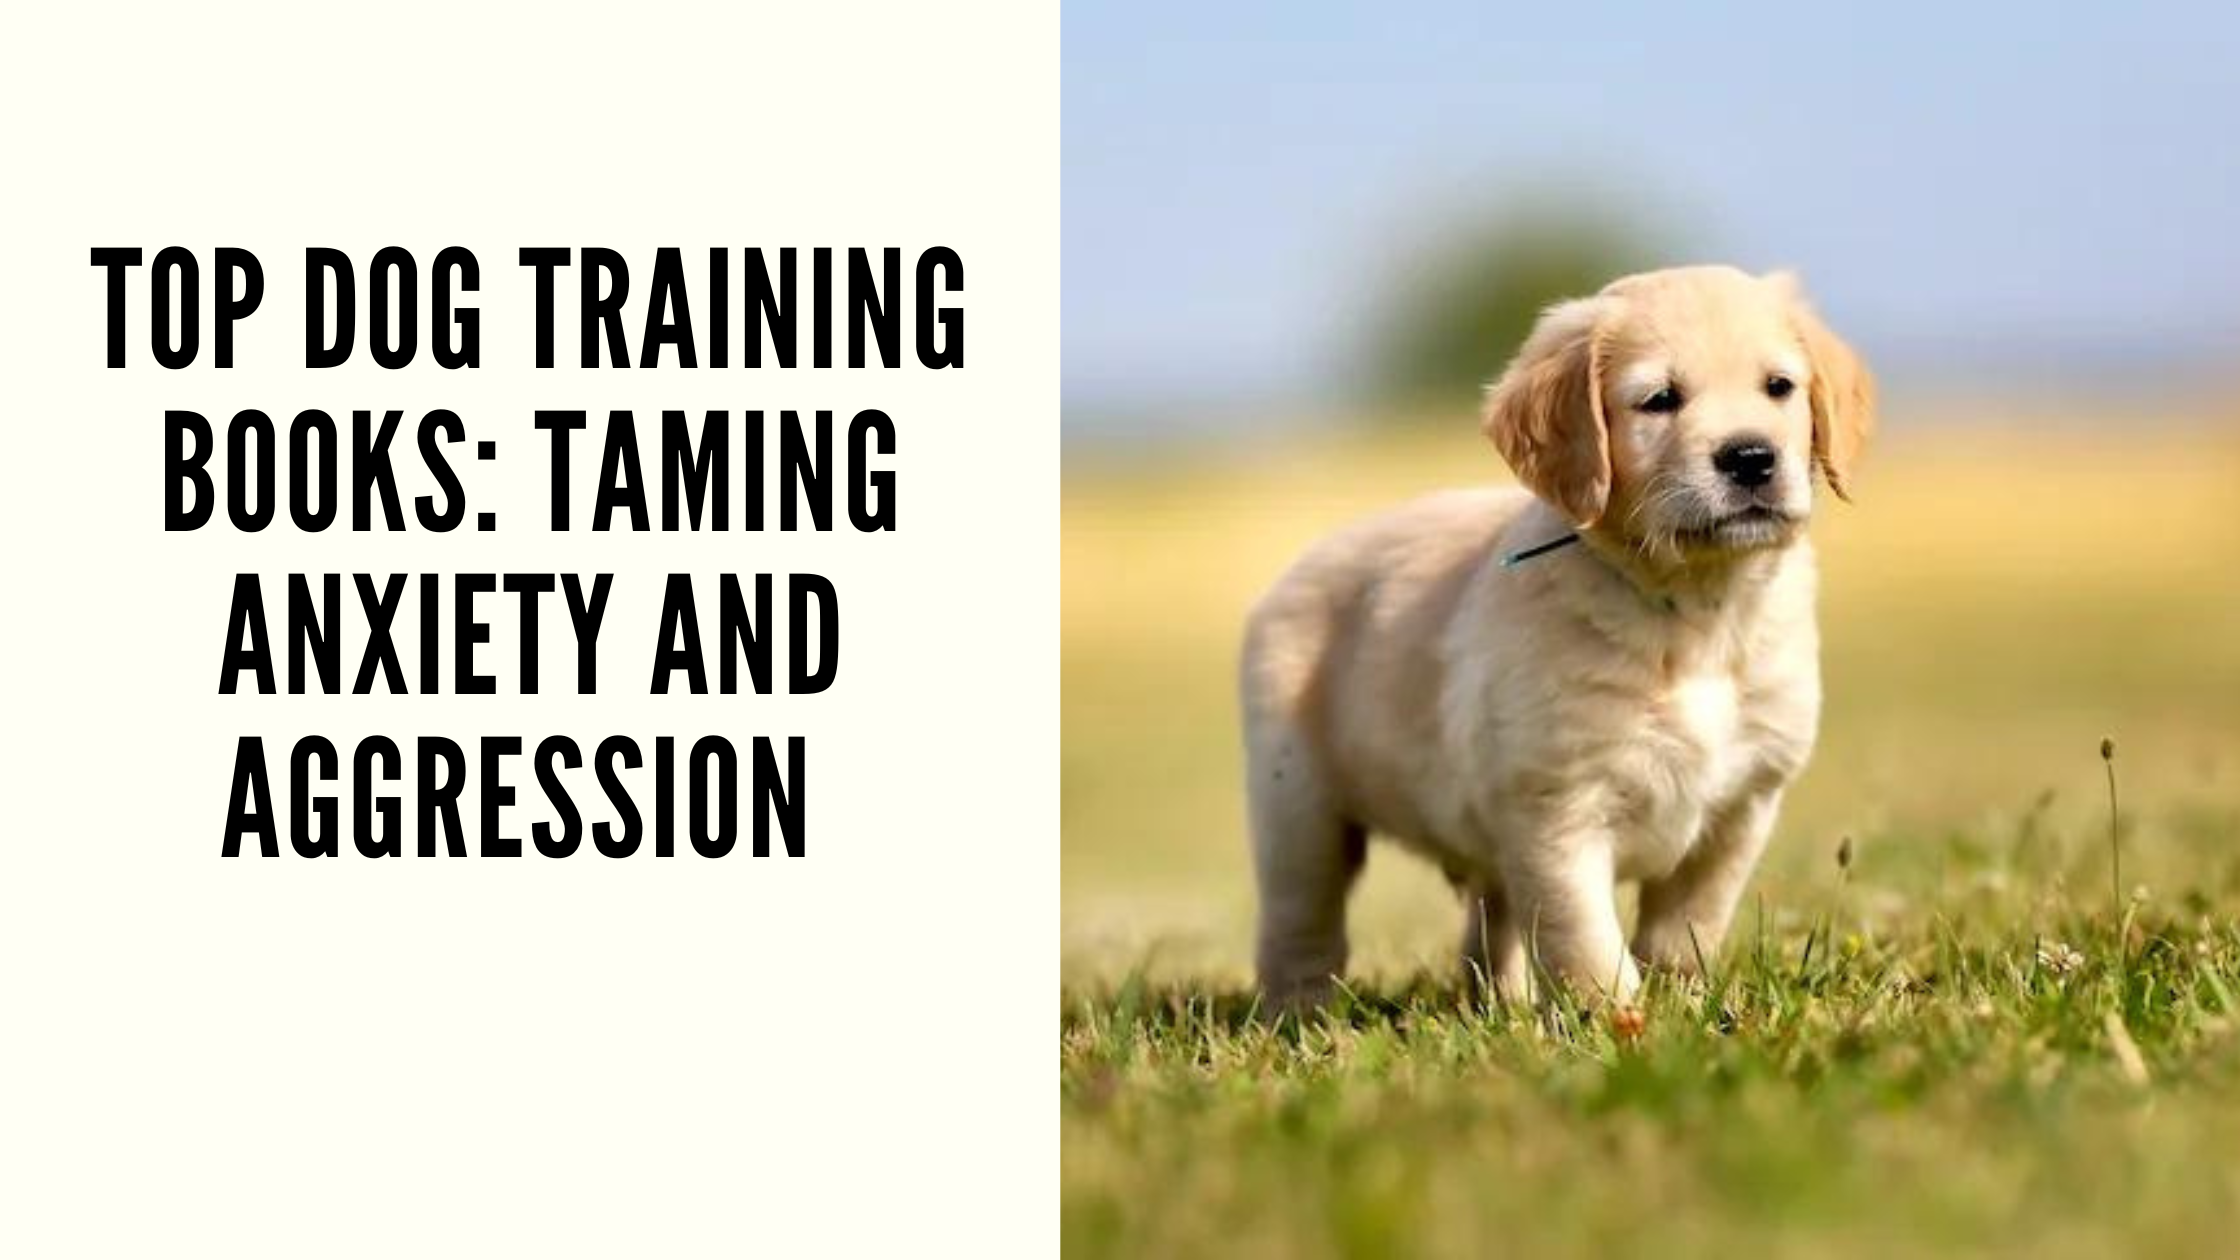 Top Dog Training Books: Taming Anxiety and Aggression recommended by Dog Expert